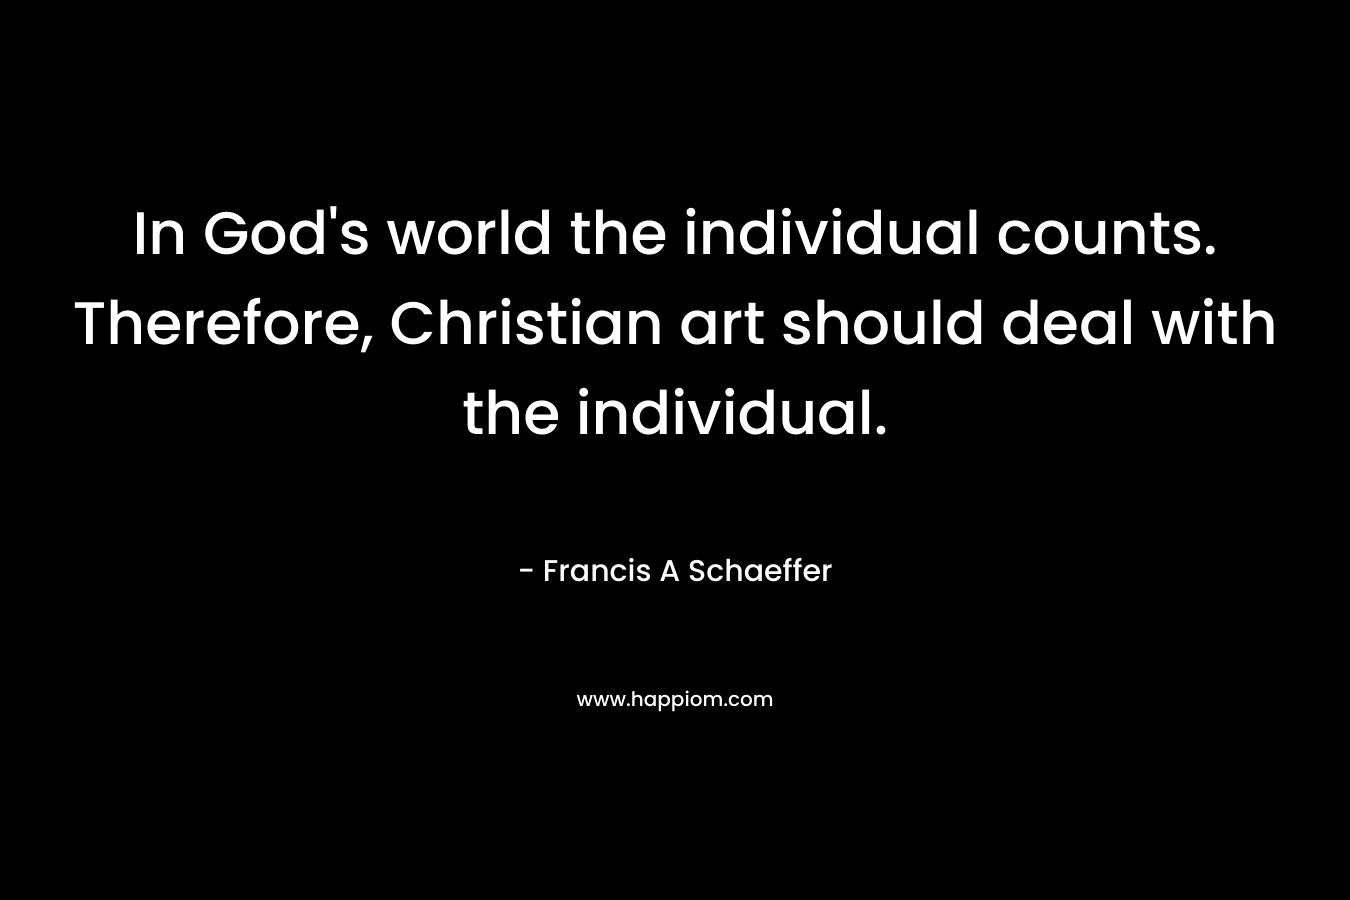 In God's world the individual counts. Therefore, Christian art should deal with the individual.